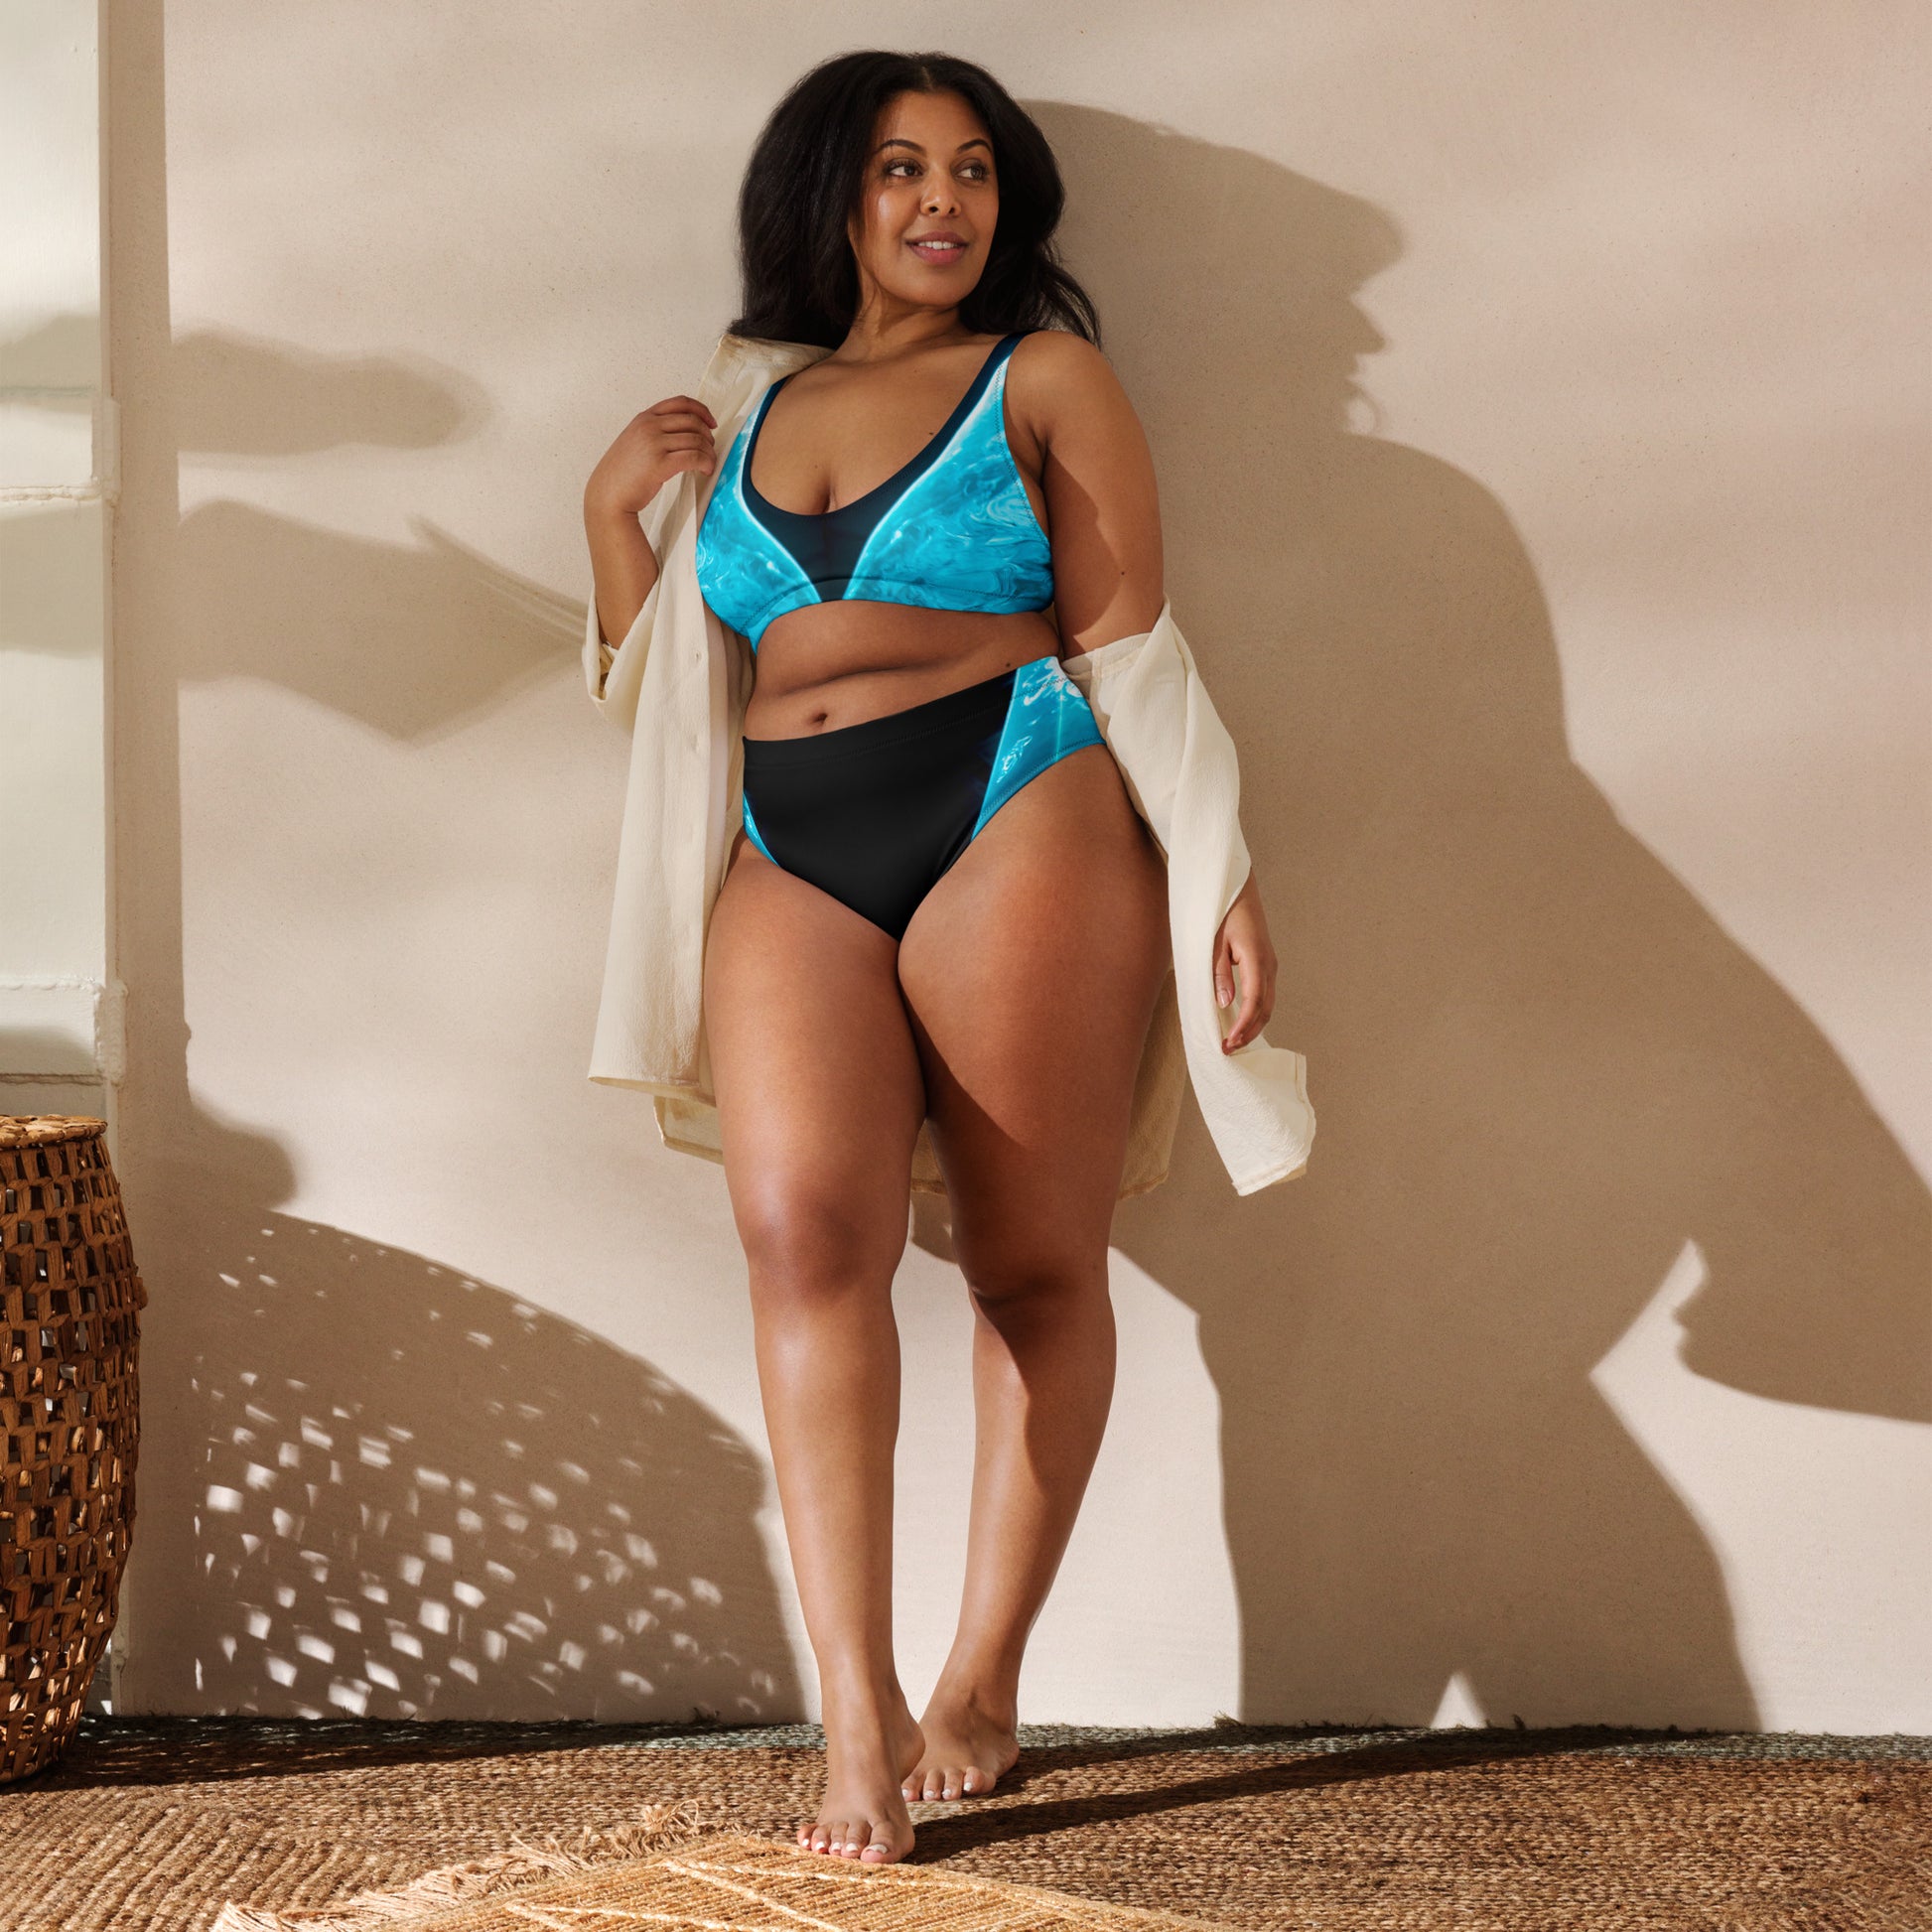 Aqua V SpotlYght High-Waisted Bikini - Triumph in the spotlight with confidence and creativity. Embrace victory and radiate aqua brilliance in this empowering masterpiece. Plus size